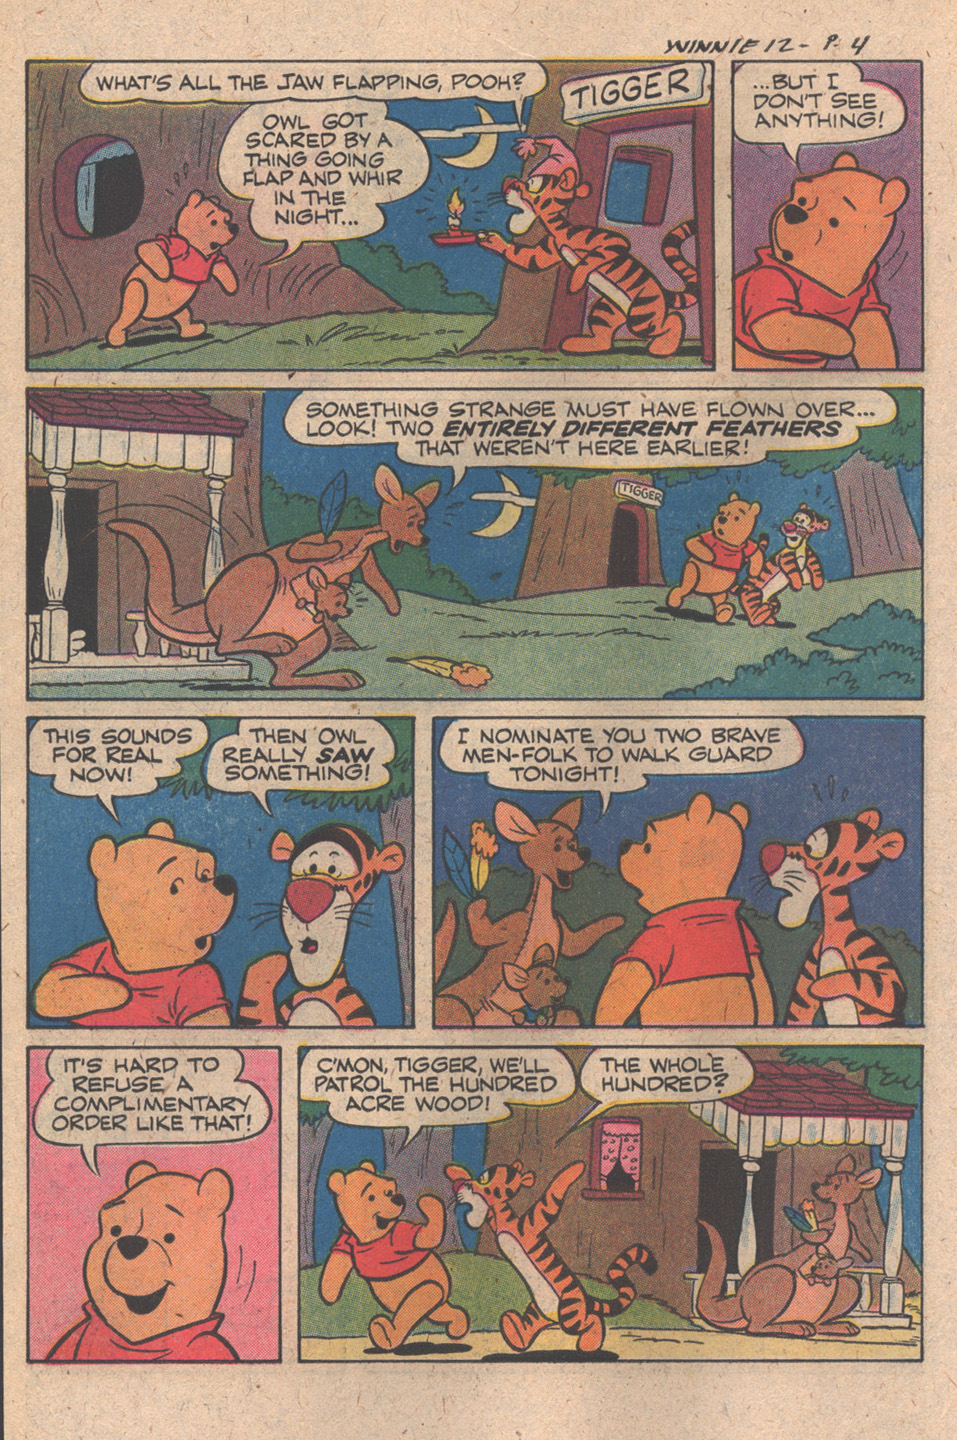 Read online Winnie-the-Pooh comic -  Issue #12 - 6